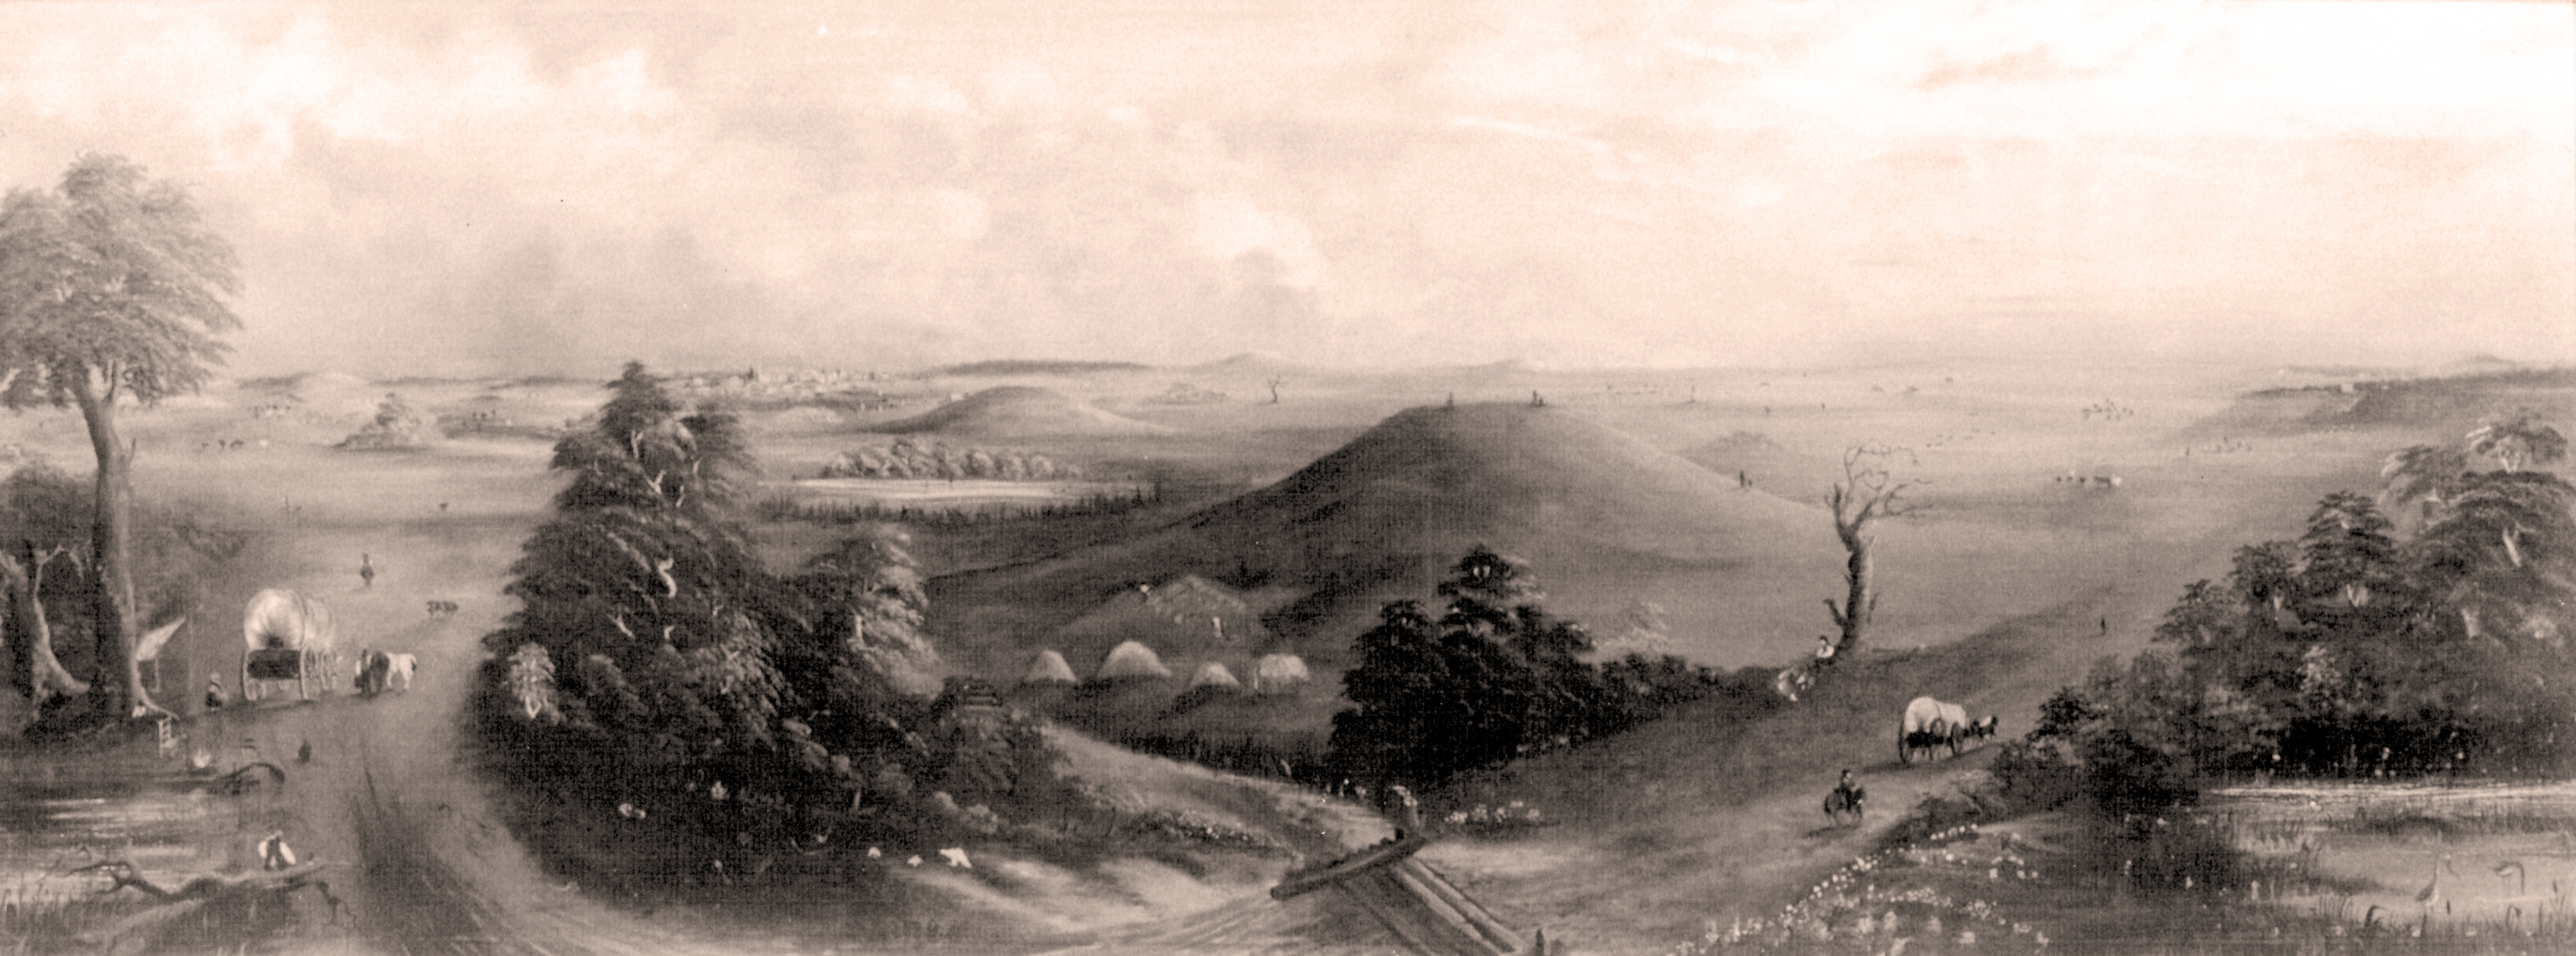 19th Century watercolor painting of the East St. Louis Mound Center